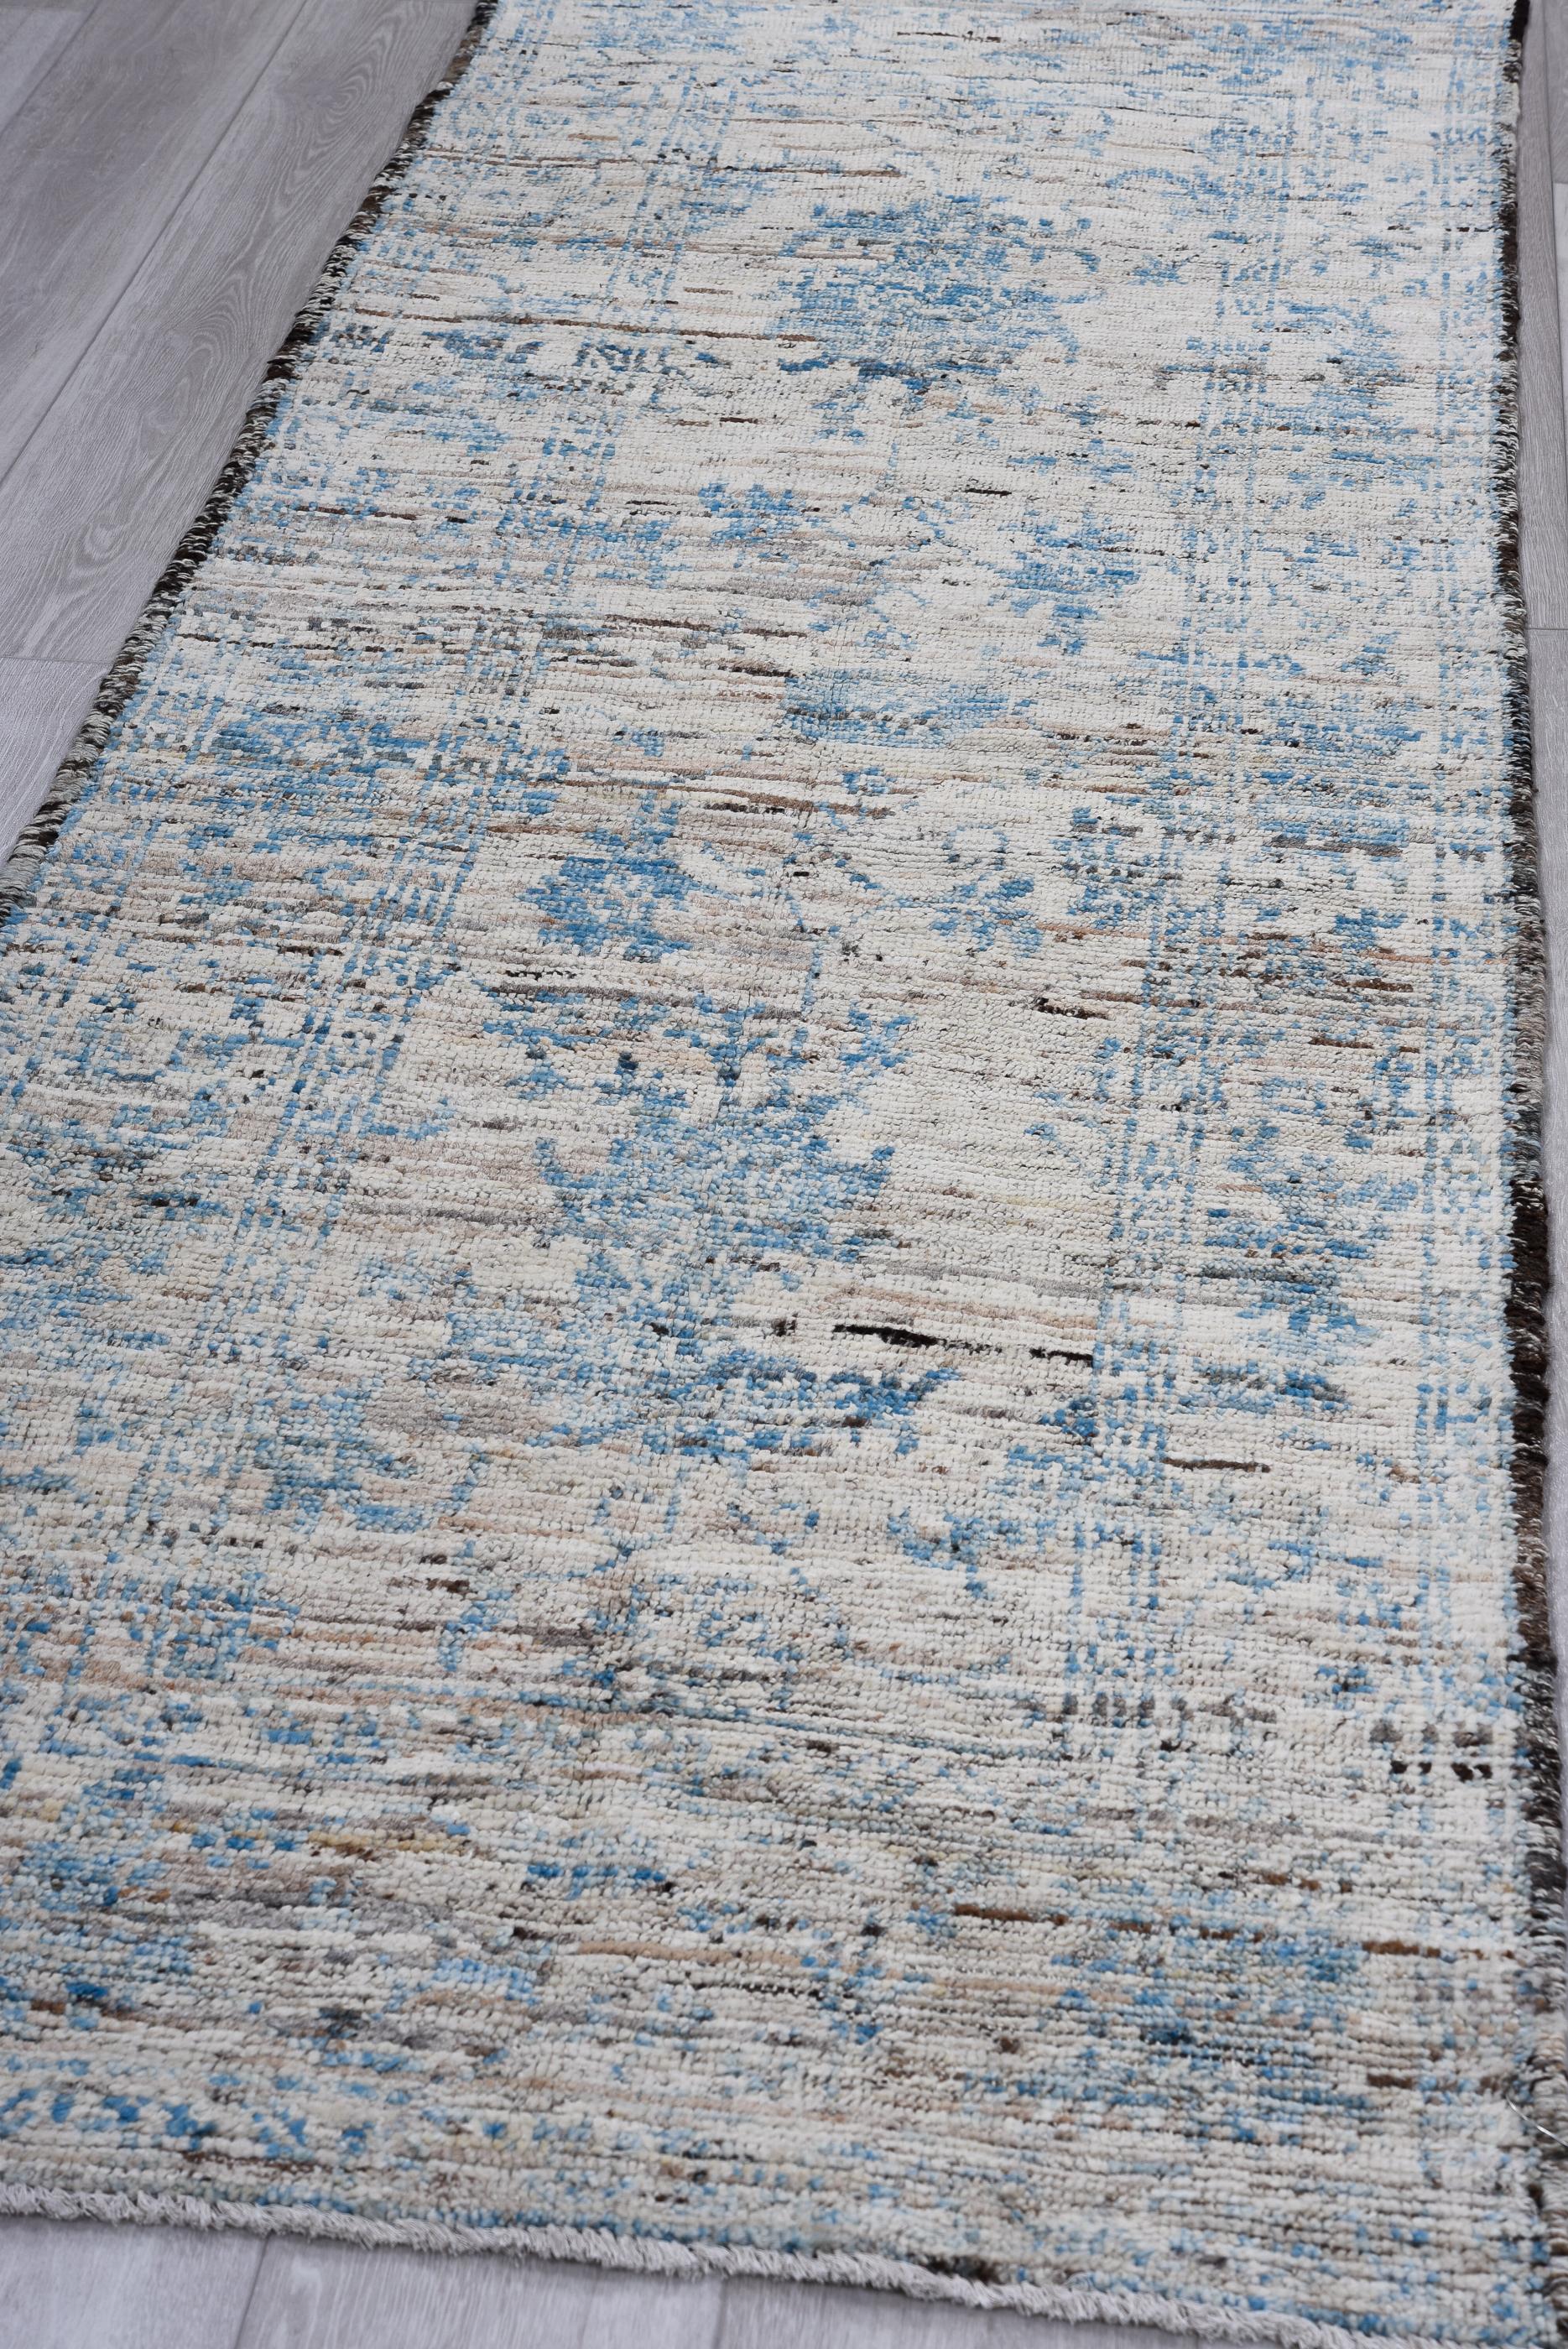 Turkish origin name for rugs made by villagers for domestic use, often in small sizes, due to loom size restrictions inside homes. They are woven as thick, shaggy rugs using the softest yarn available to provide warmth and insulation during winter